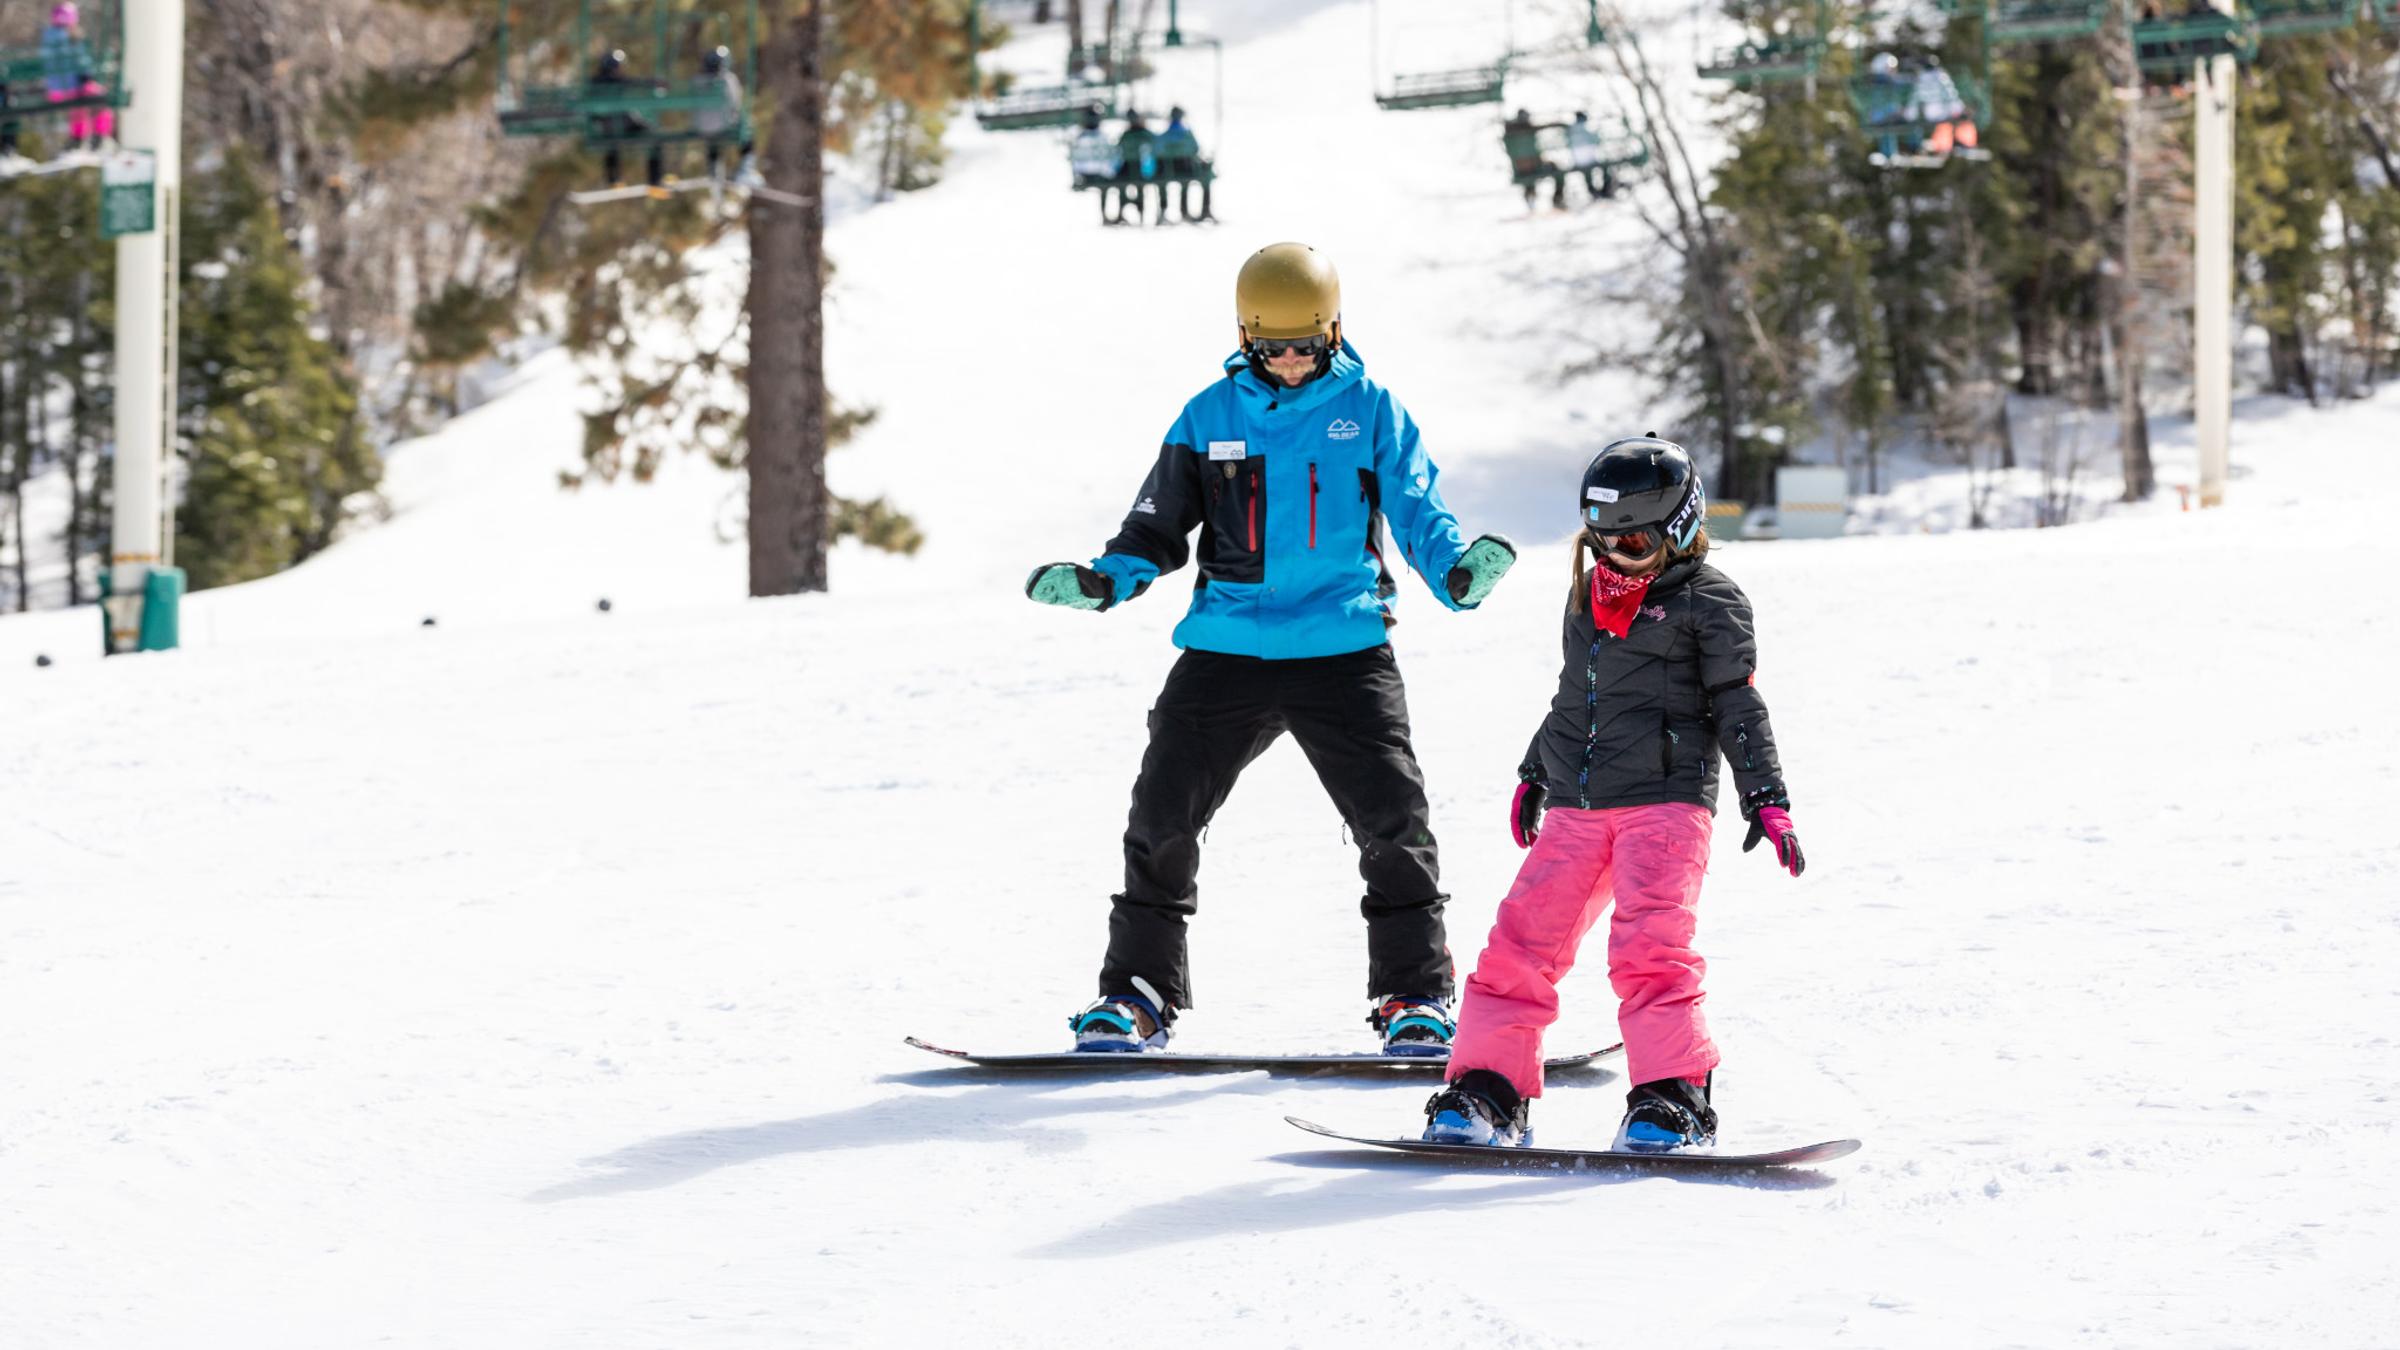 Young snowboarder taking a private lesson with instructor.